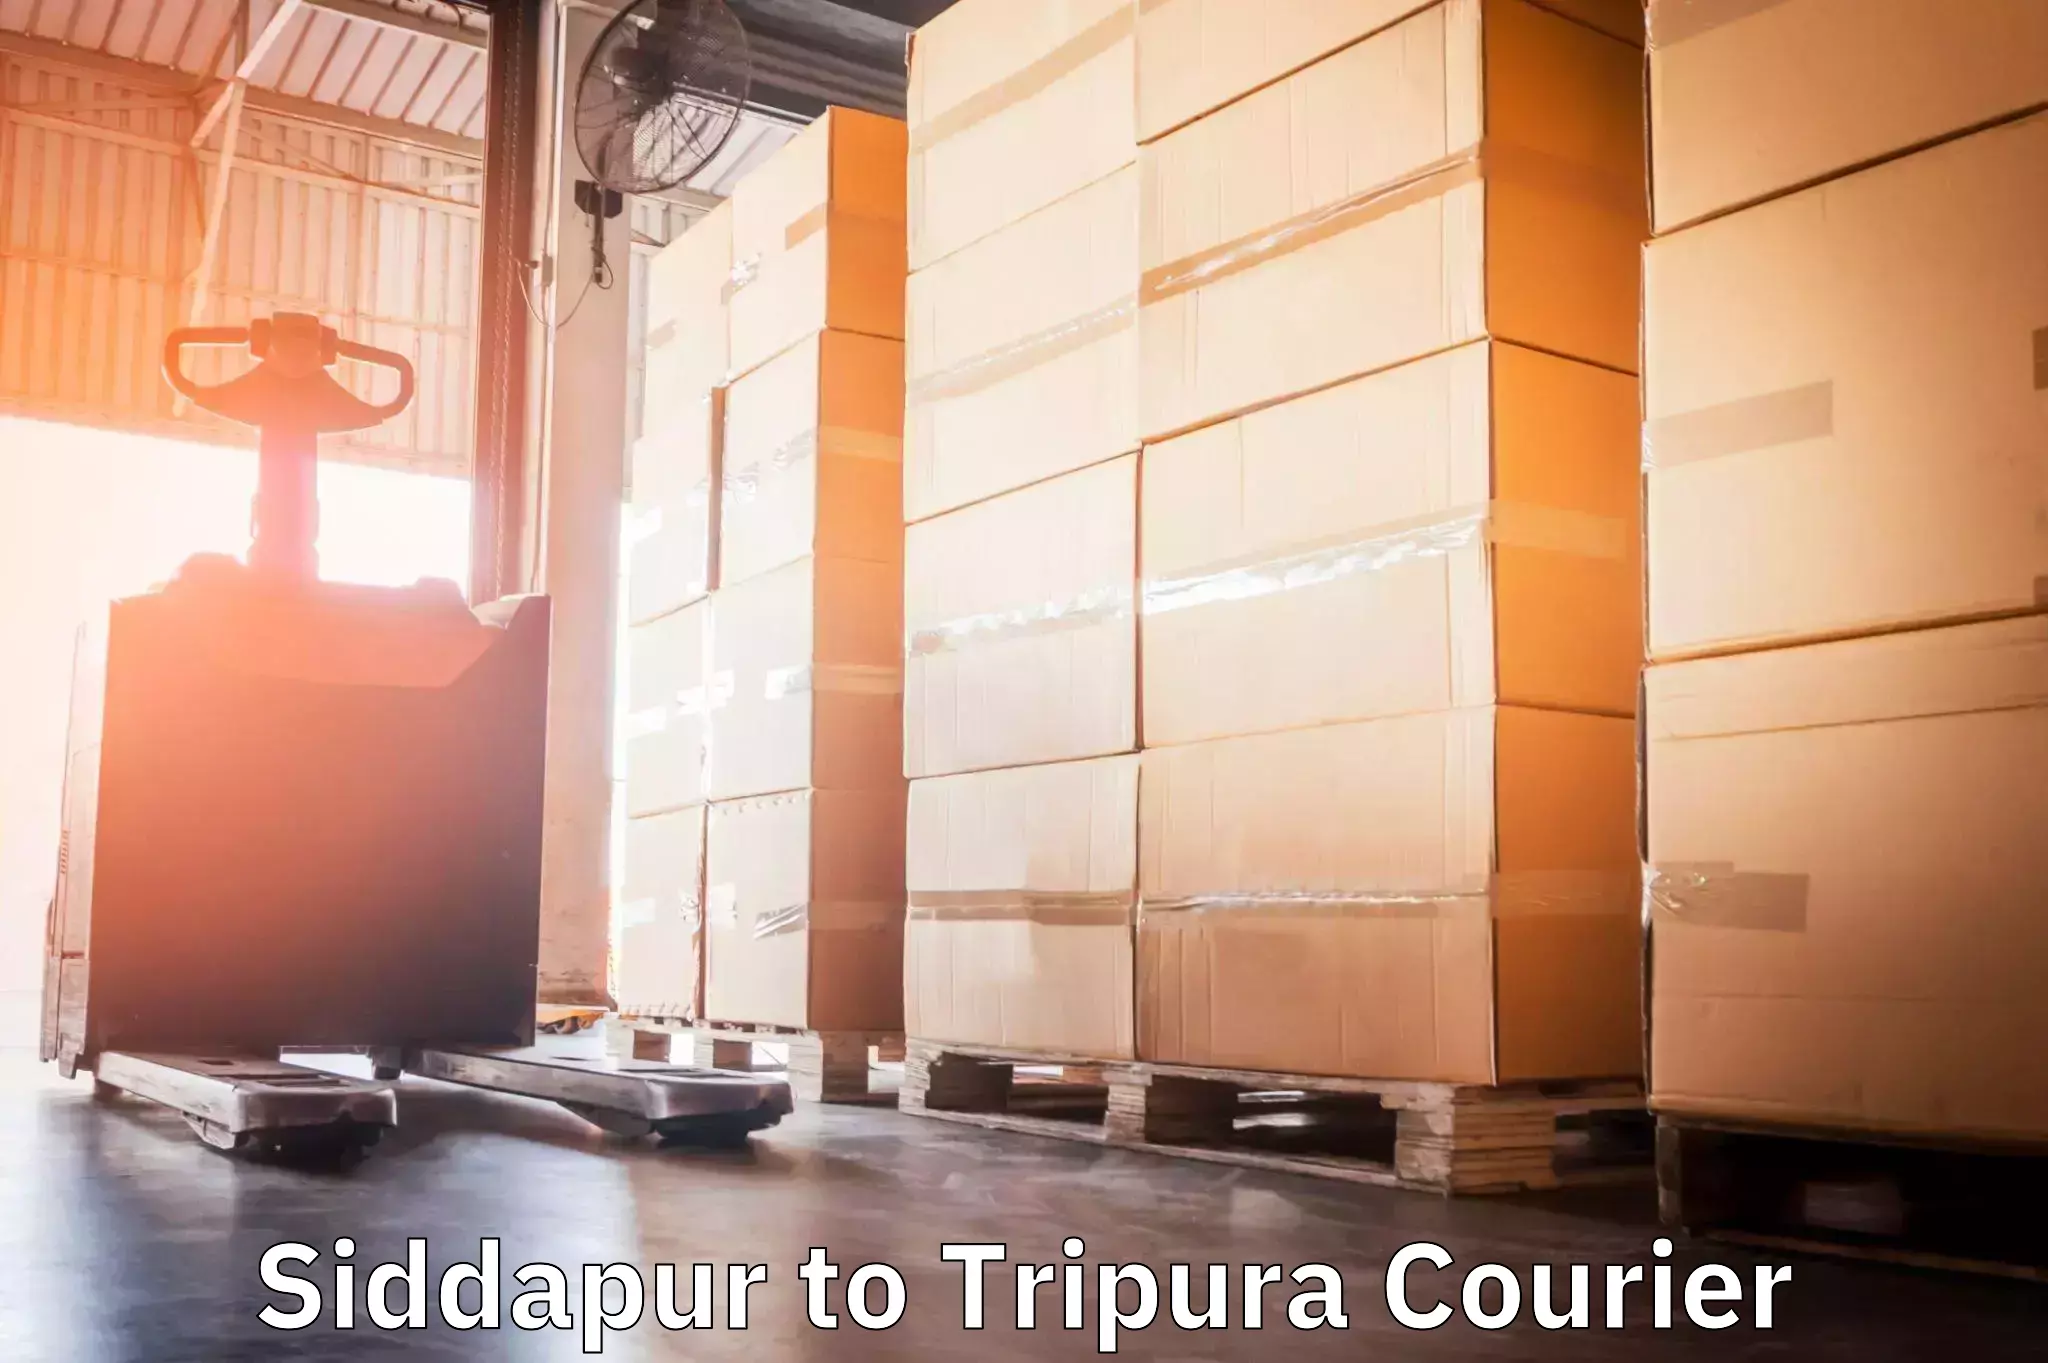 Holiday shipping services Siddapur to Udaipur Tripura